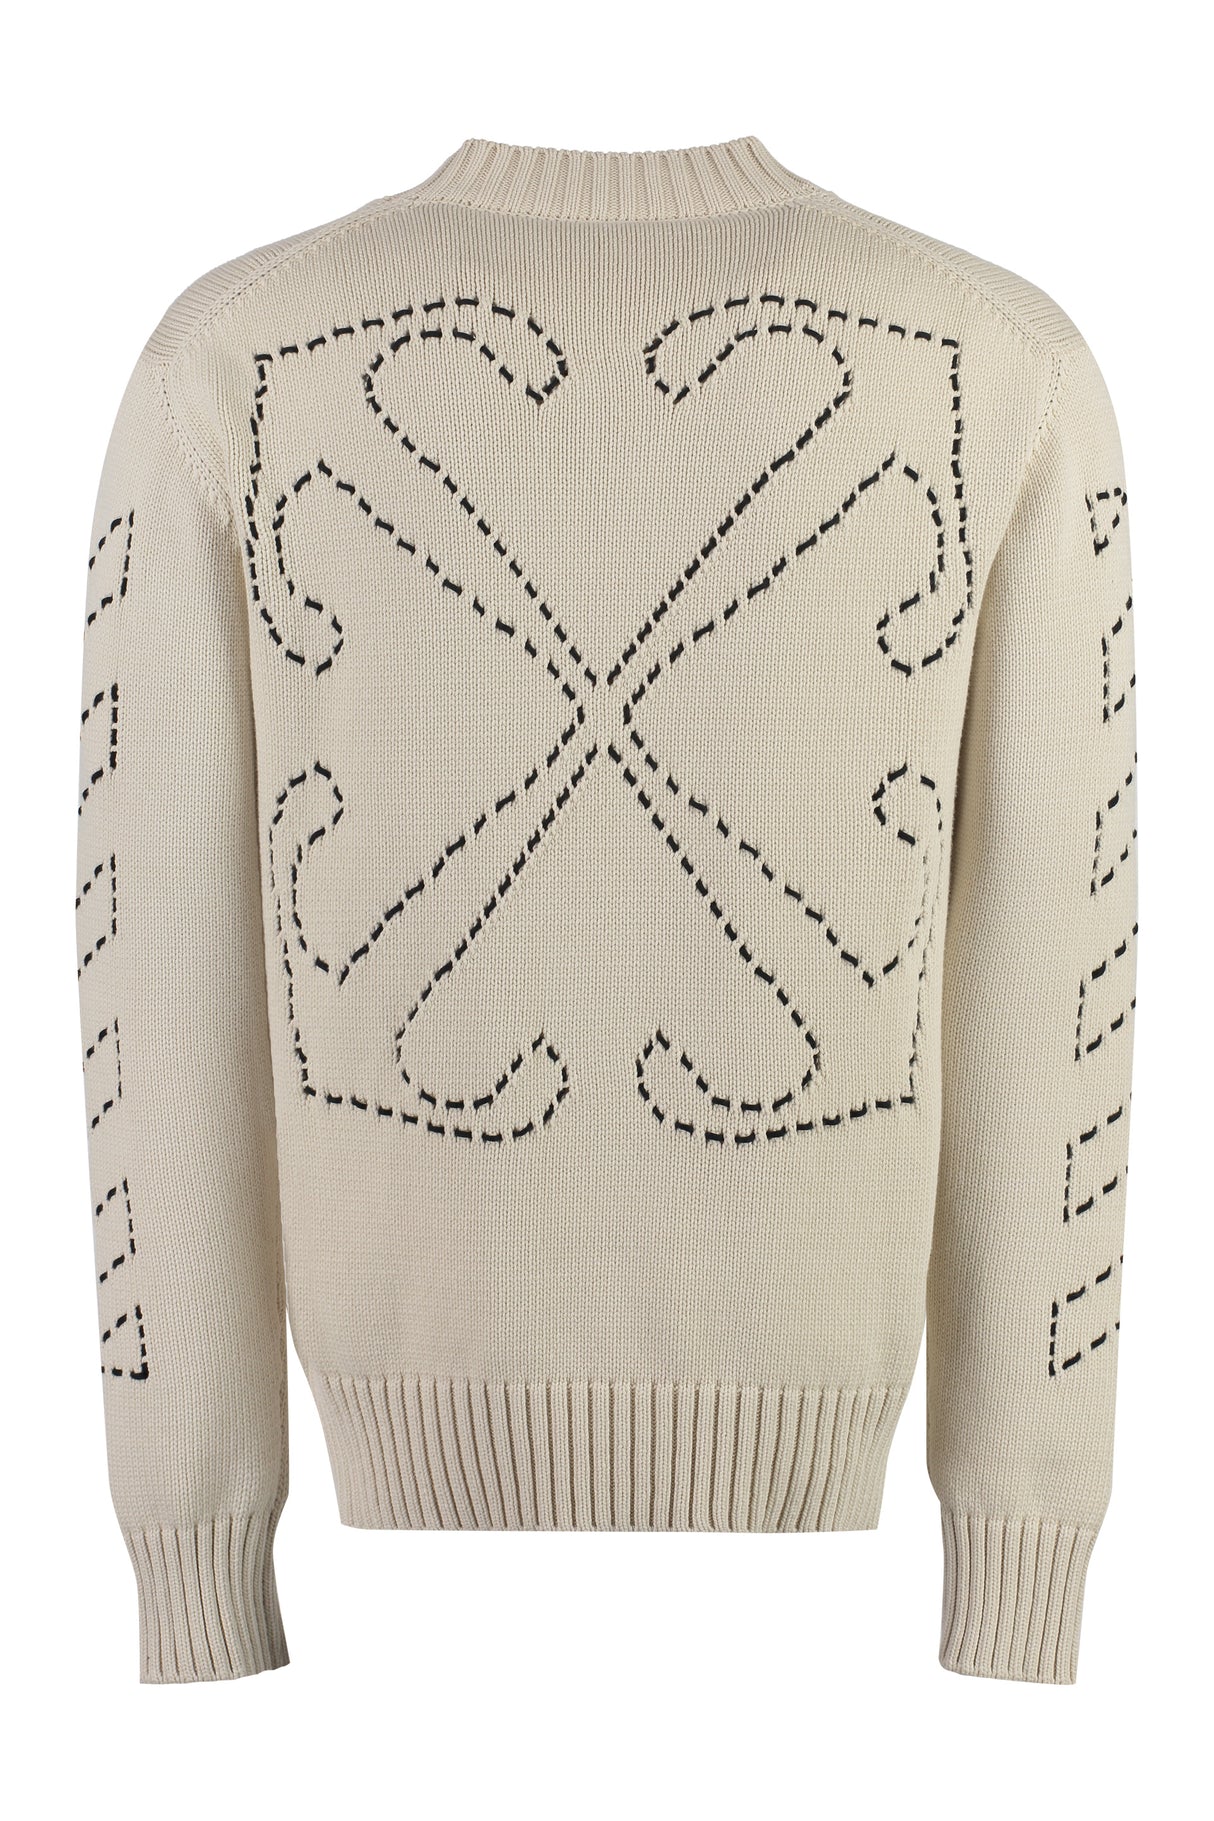 OFF-WHITE Beige Cotton Blend Crew-Neck Sweater for Men - FW23 Collection